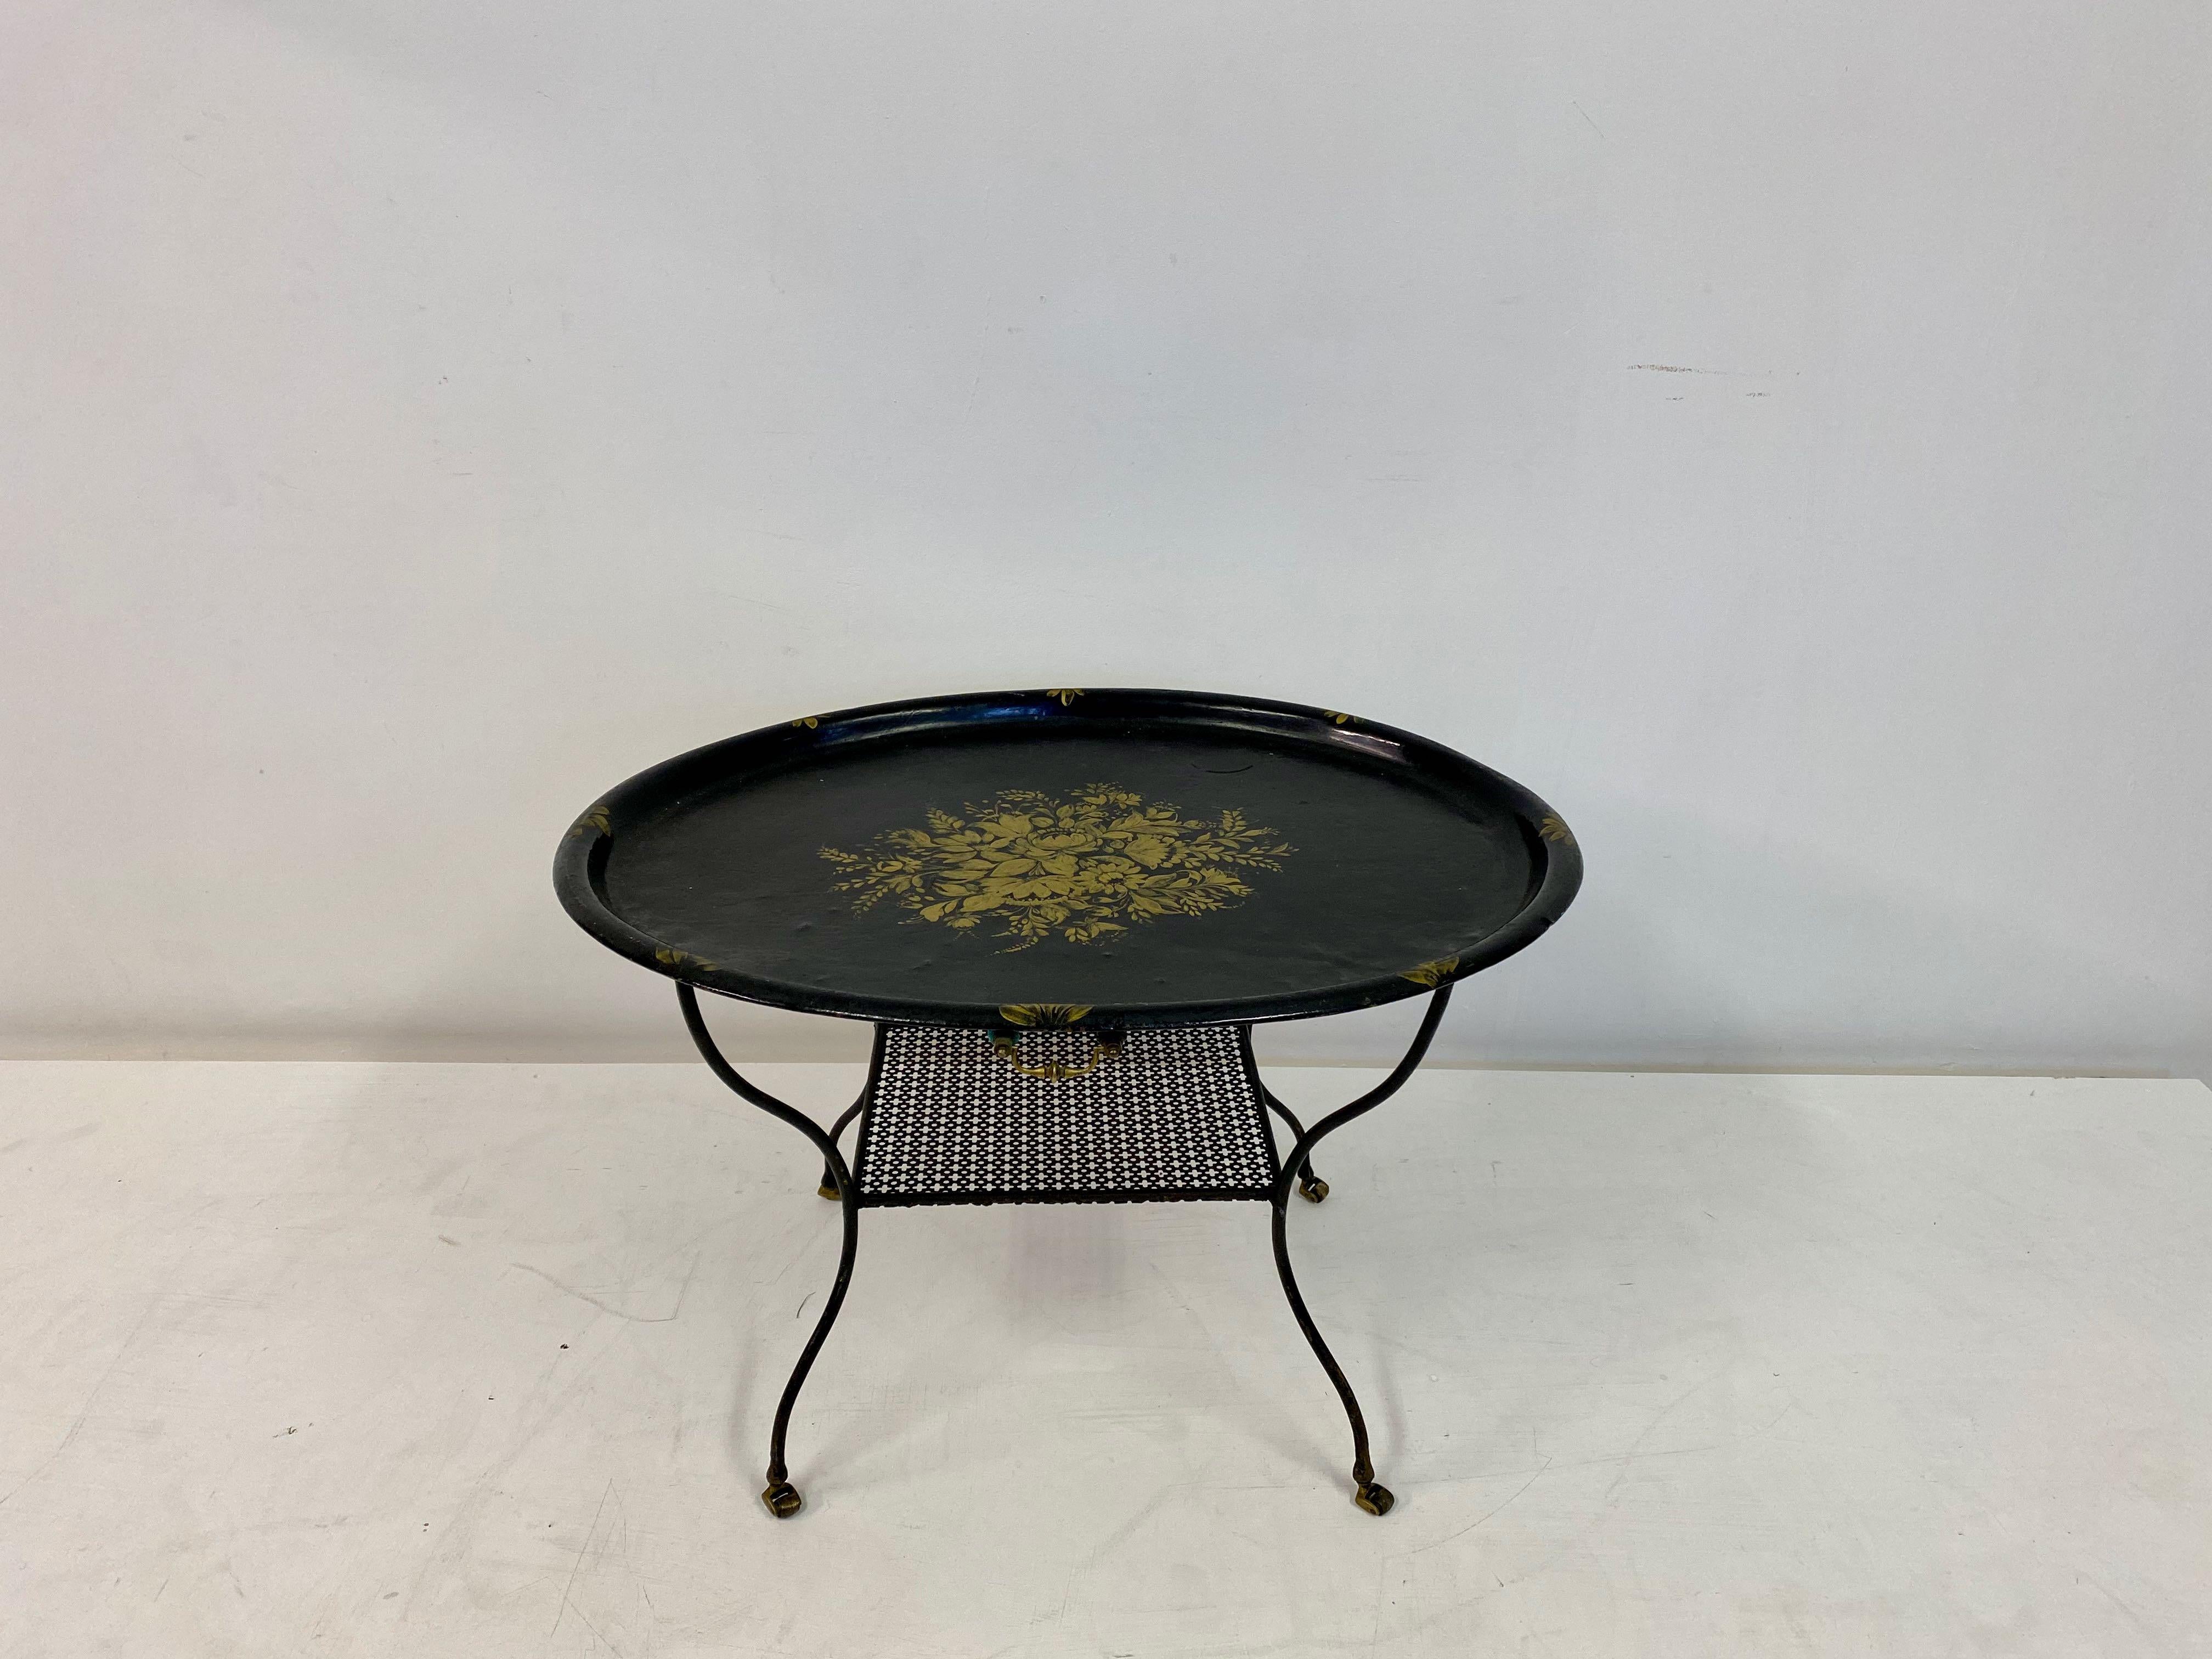 Tray table

Black lacquered tray

Flower decoration

Black metal stand on brass castors

Perforated metal shelf

French early 20th century.